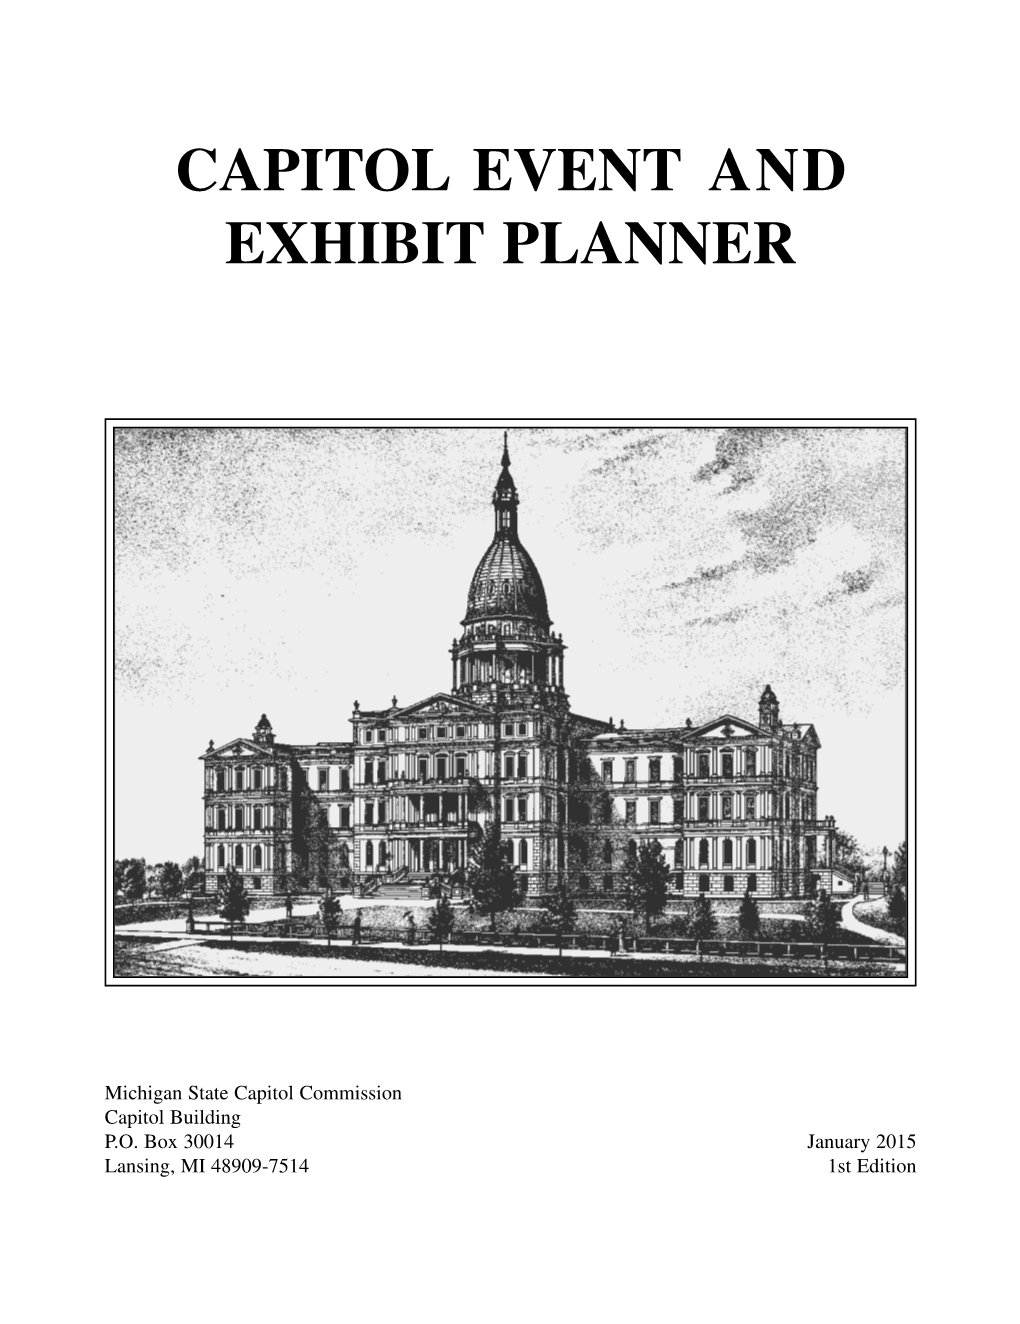 Capitol Event and Exhibit Planner